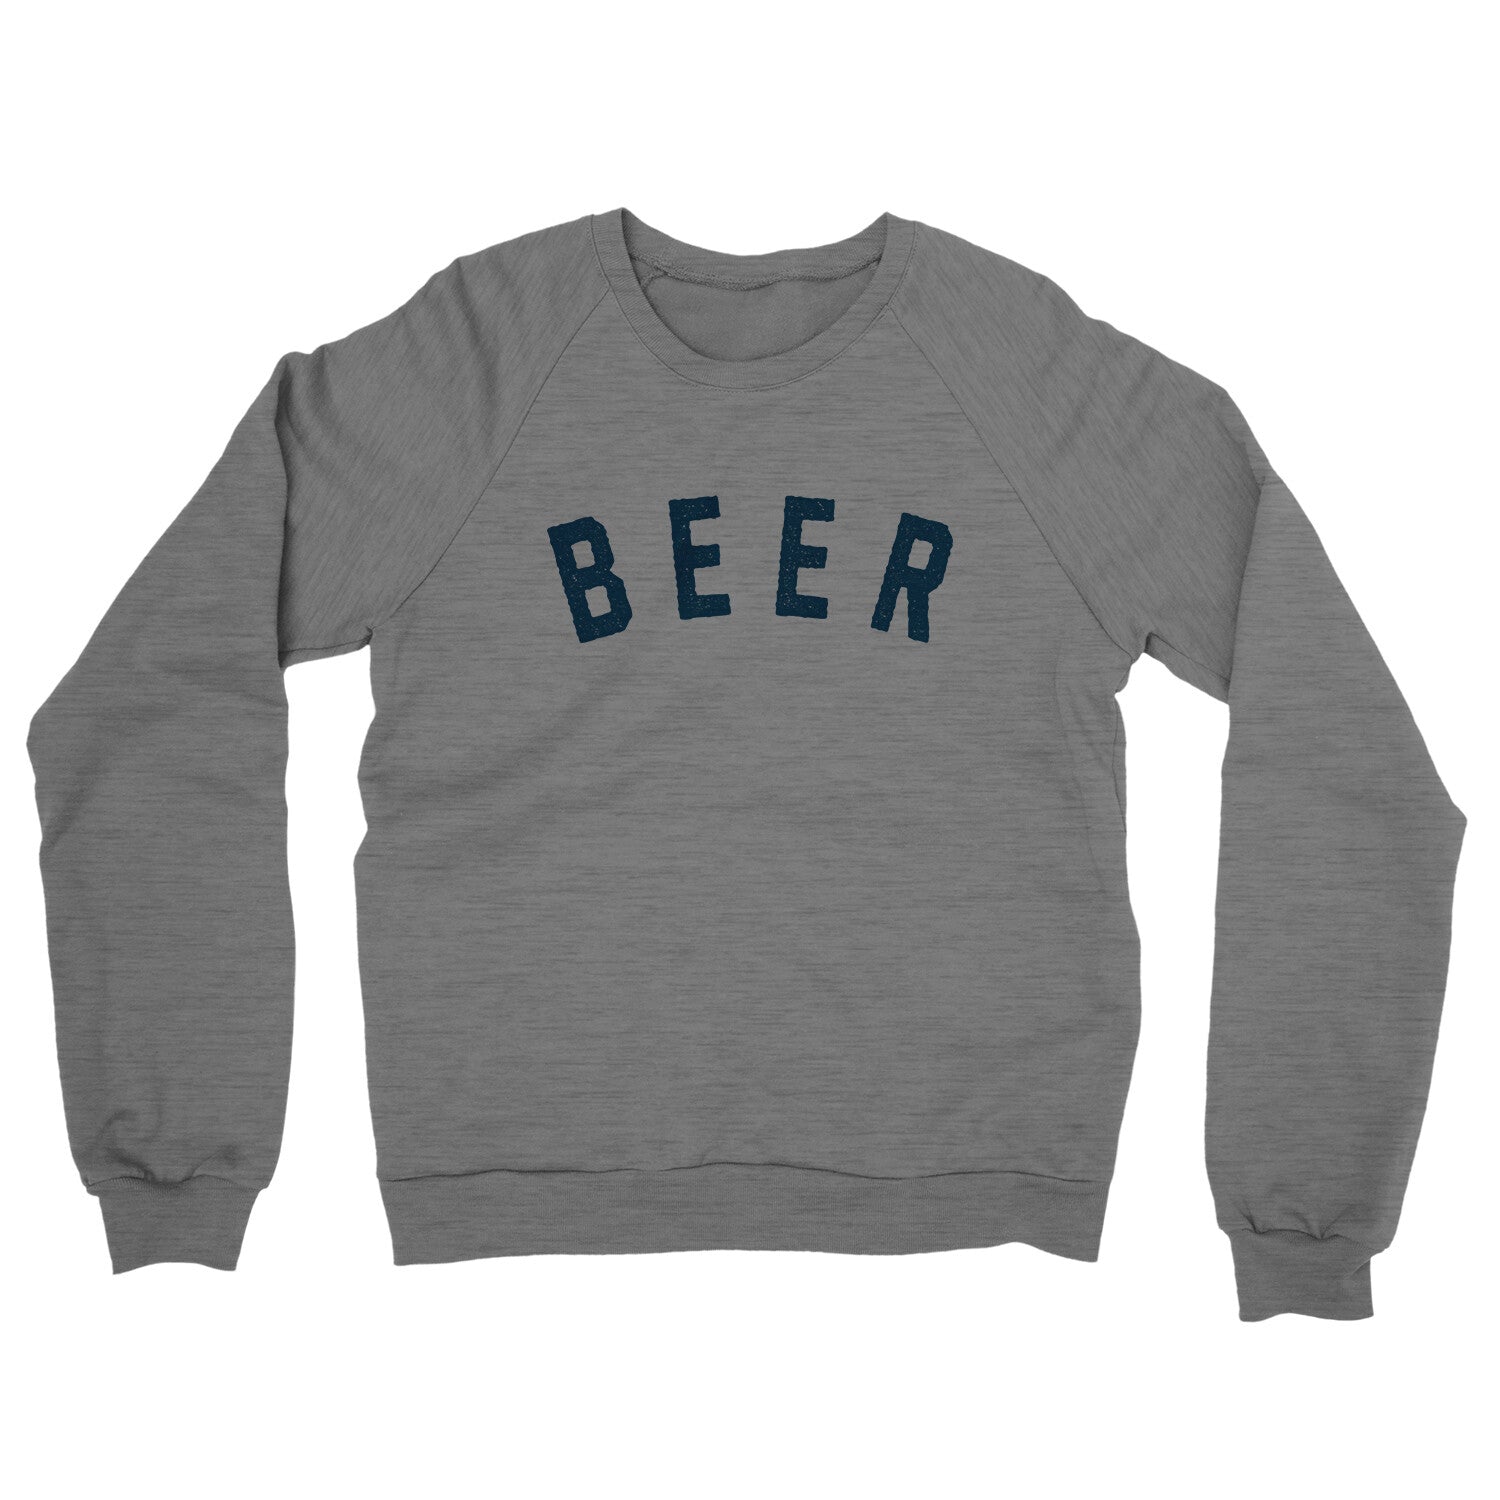 Beer in Graphite Heather Color